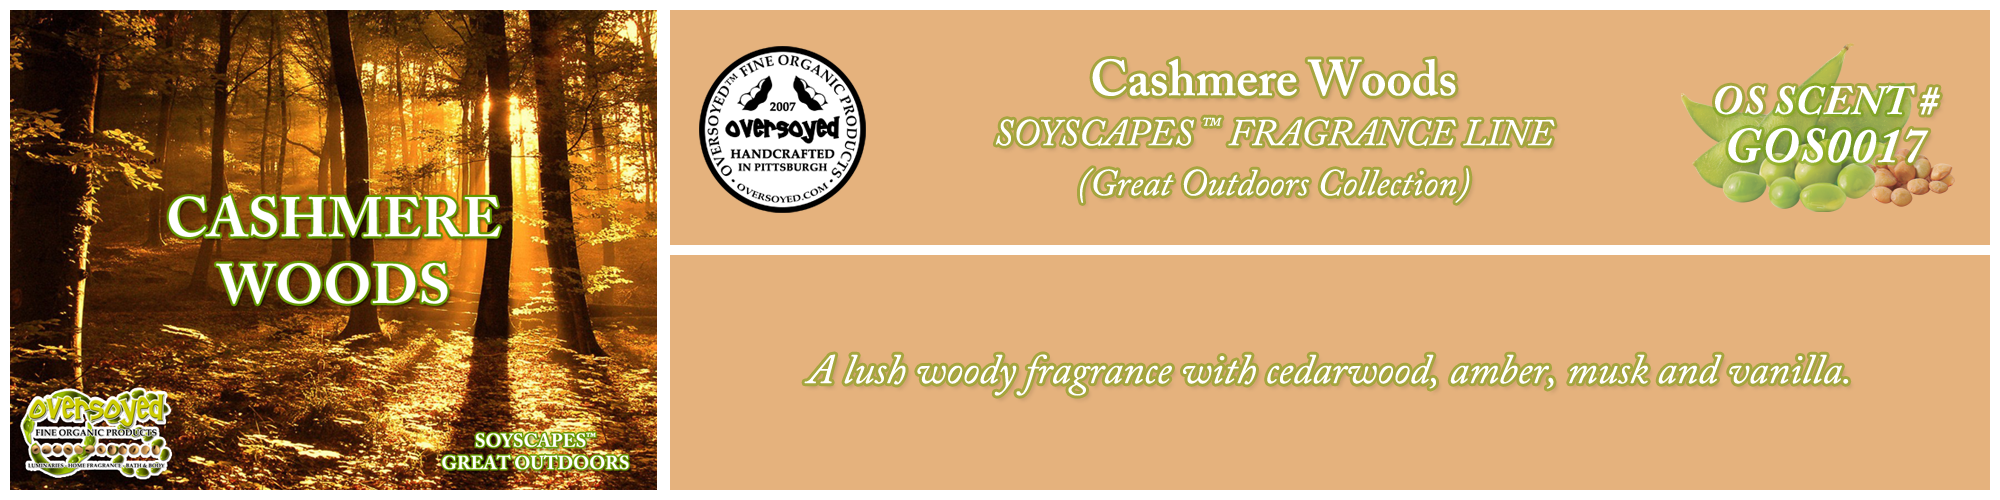 Cashmere Woods Handcrafted Products Collection